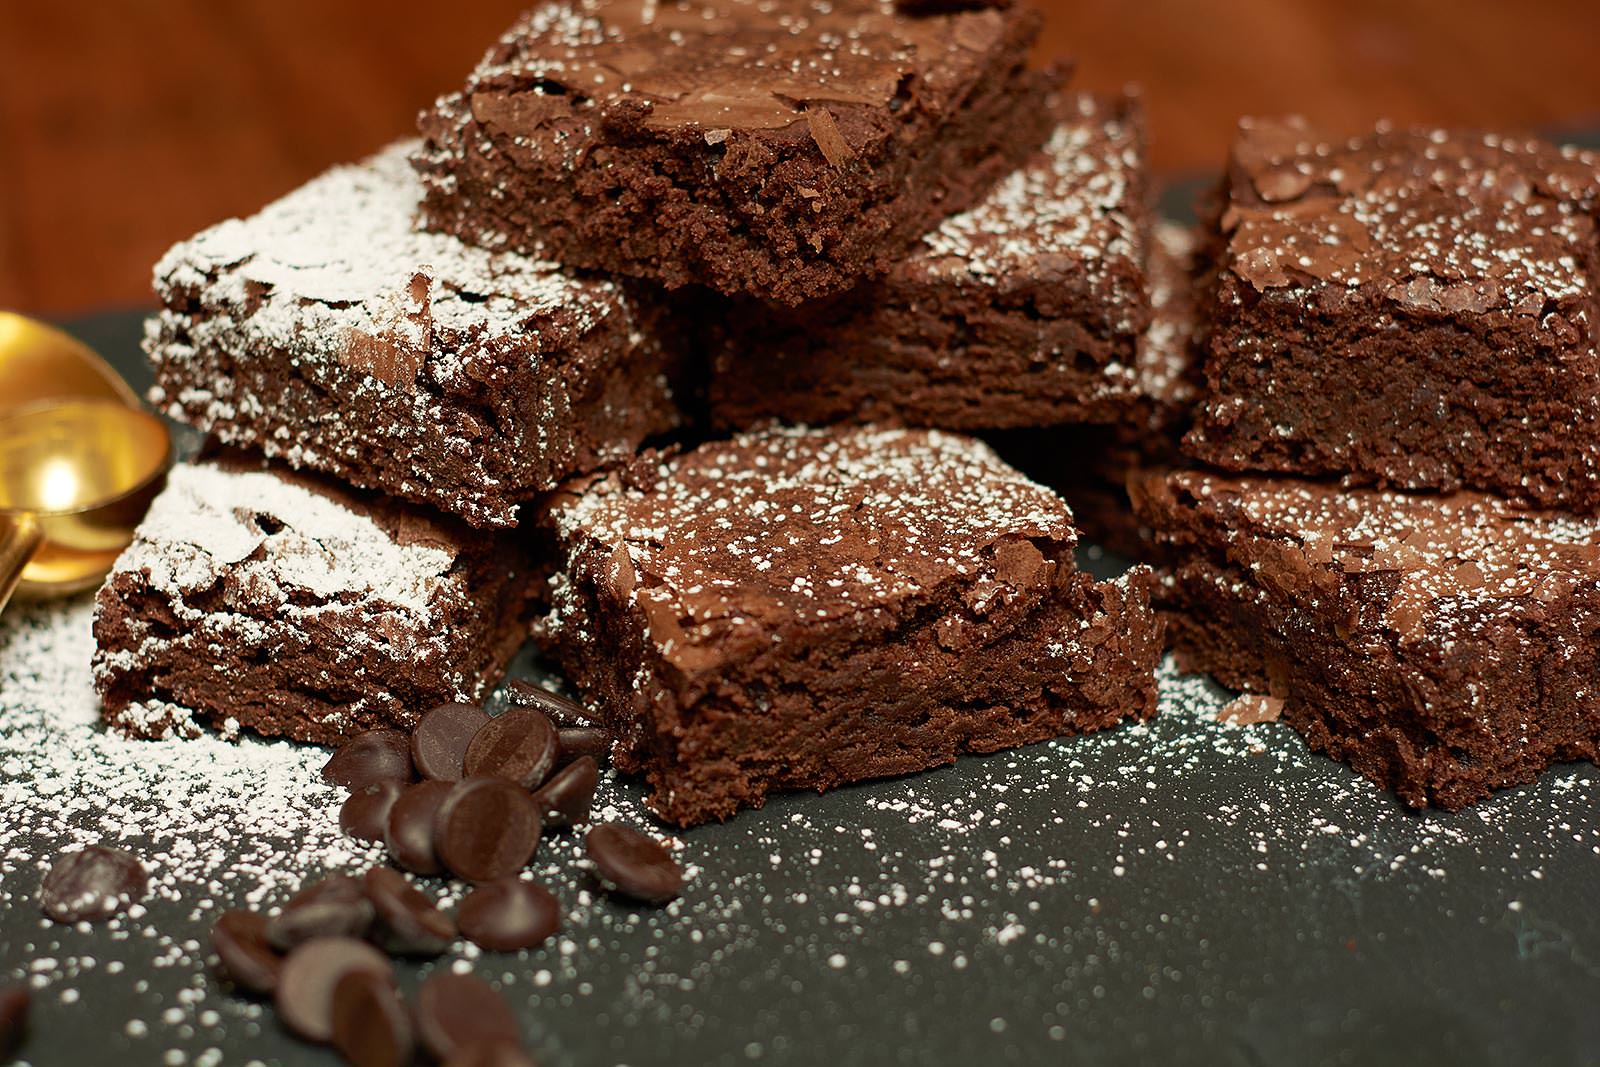 Top-3-This-Week-Indonesias-New-Capital-City-Plogging-and-Recipe-to-Healthy-Guilt-Free-Brownies-Delicious-Guilt-Free-Brownies